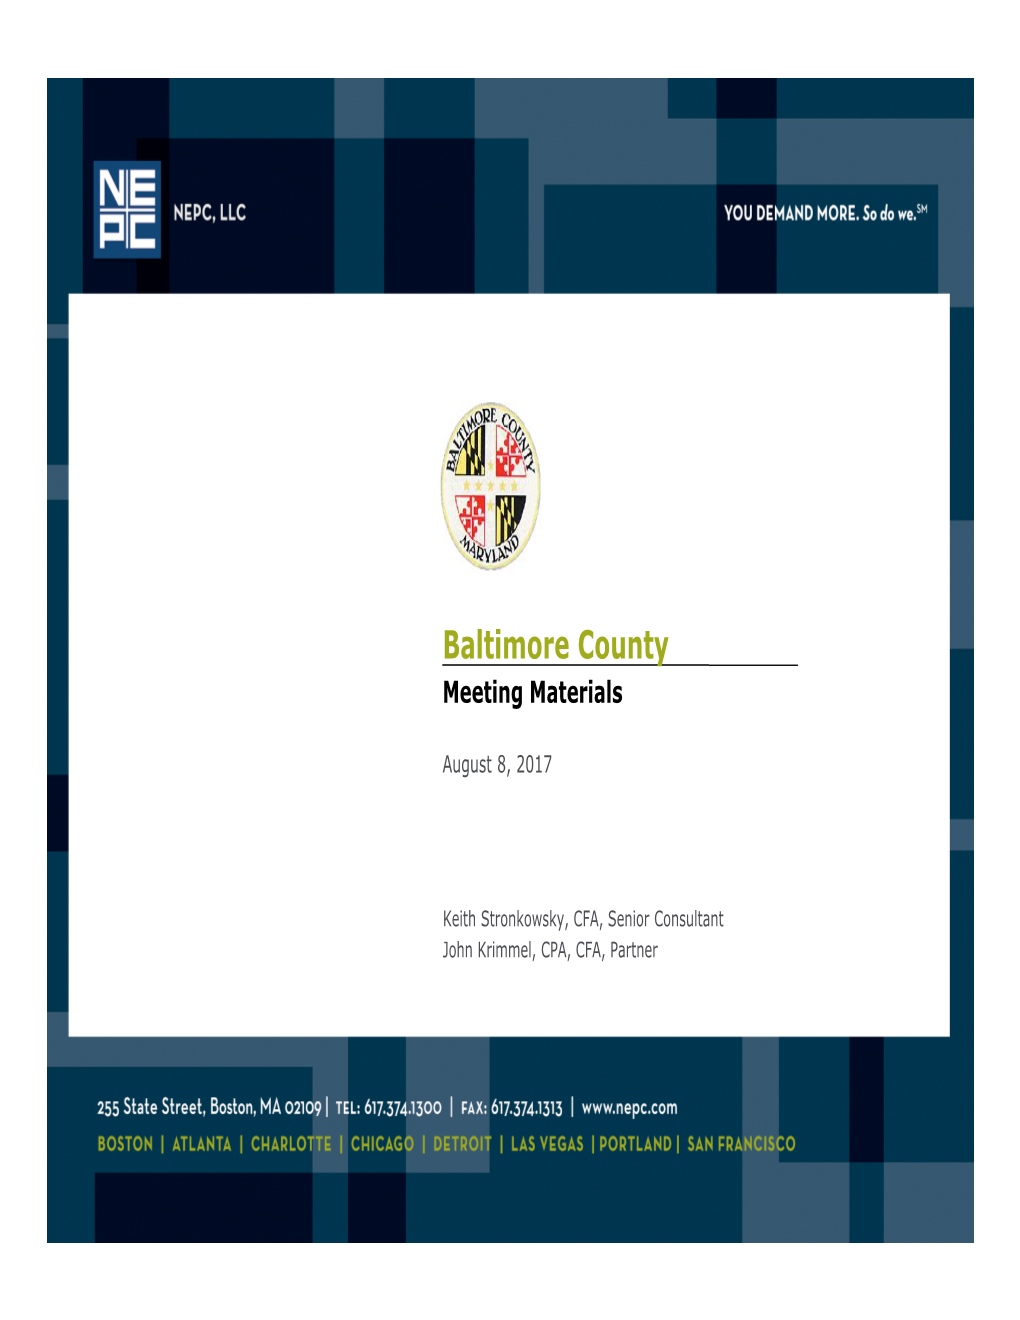 Baltimore County Meeting Materials